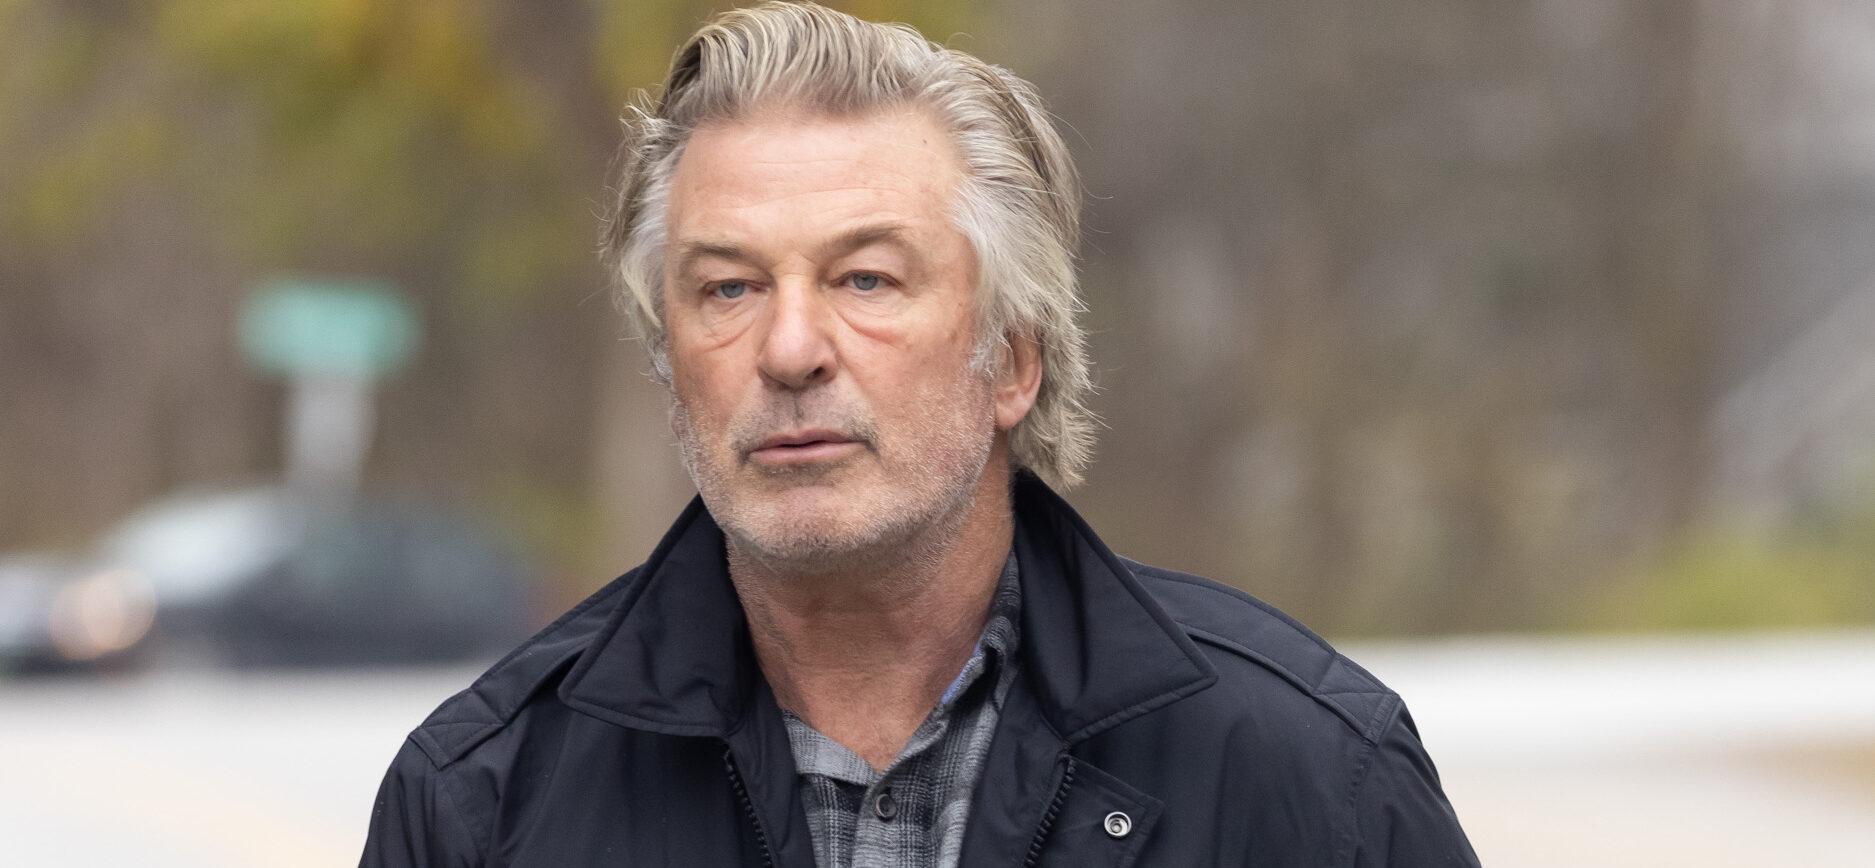 Alec Baldwin ‘Rust’ Shooting Update: ‘I Never Pulled The Trigger’